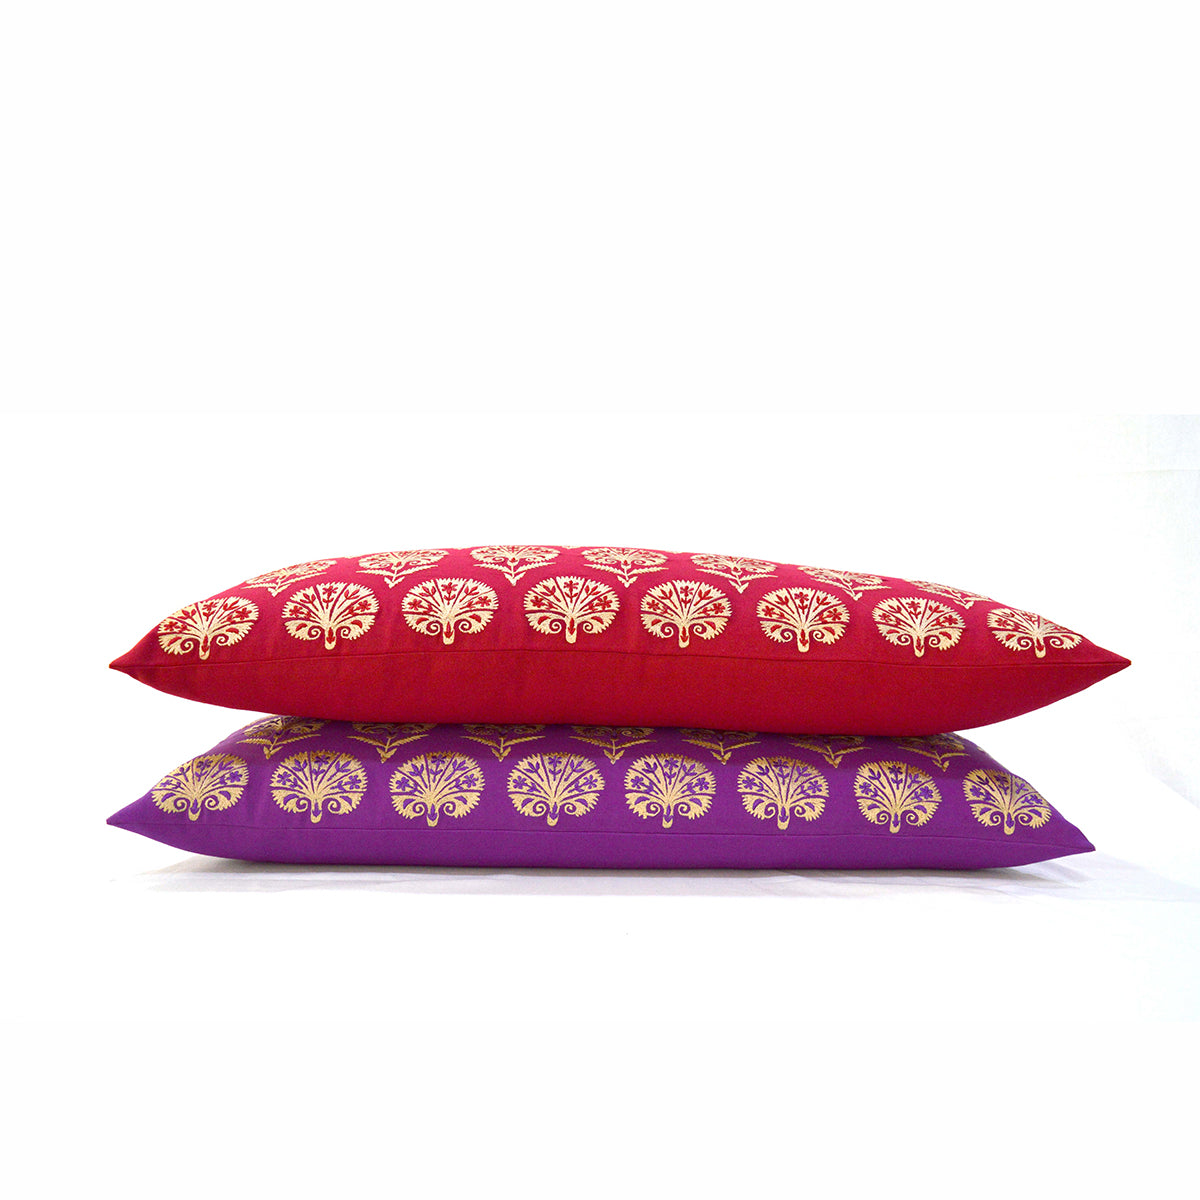 Red cotton pillow cover with Suzani inspired silk embroidery, long lumbar pillow cover, 12X30 inches. other sizes available